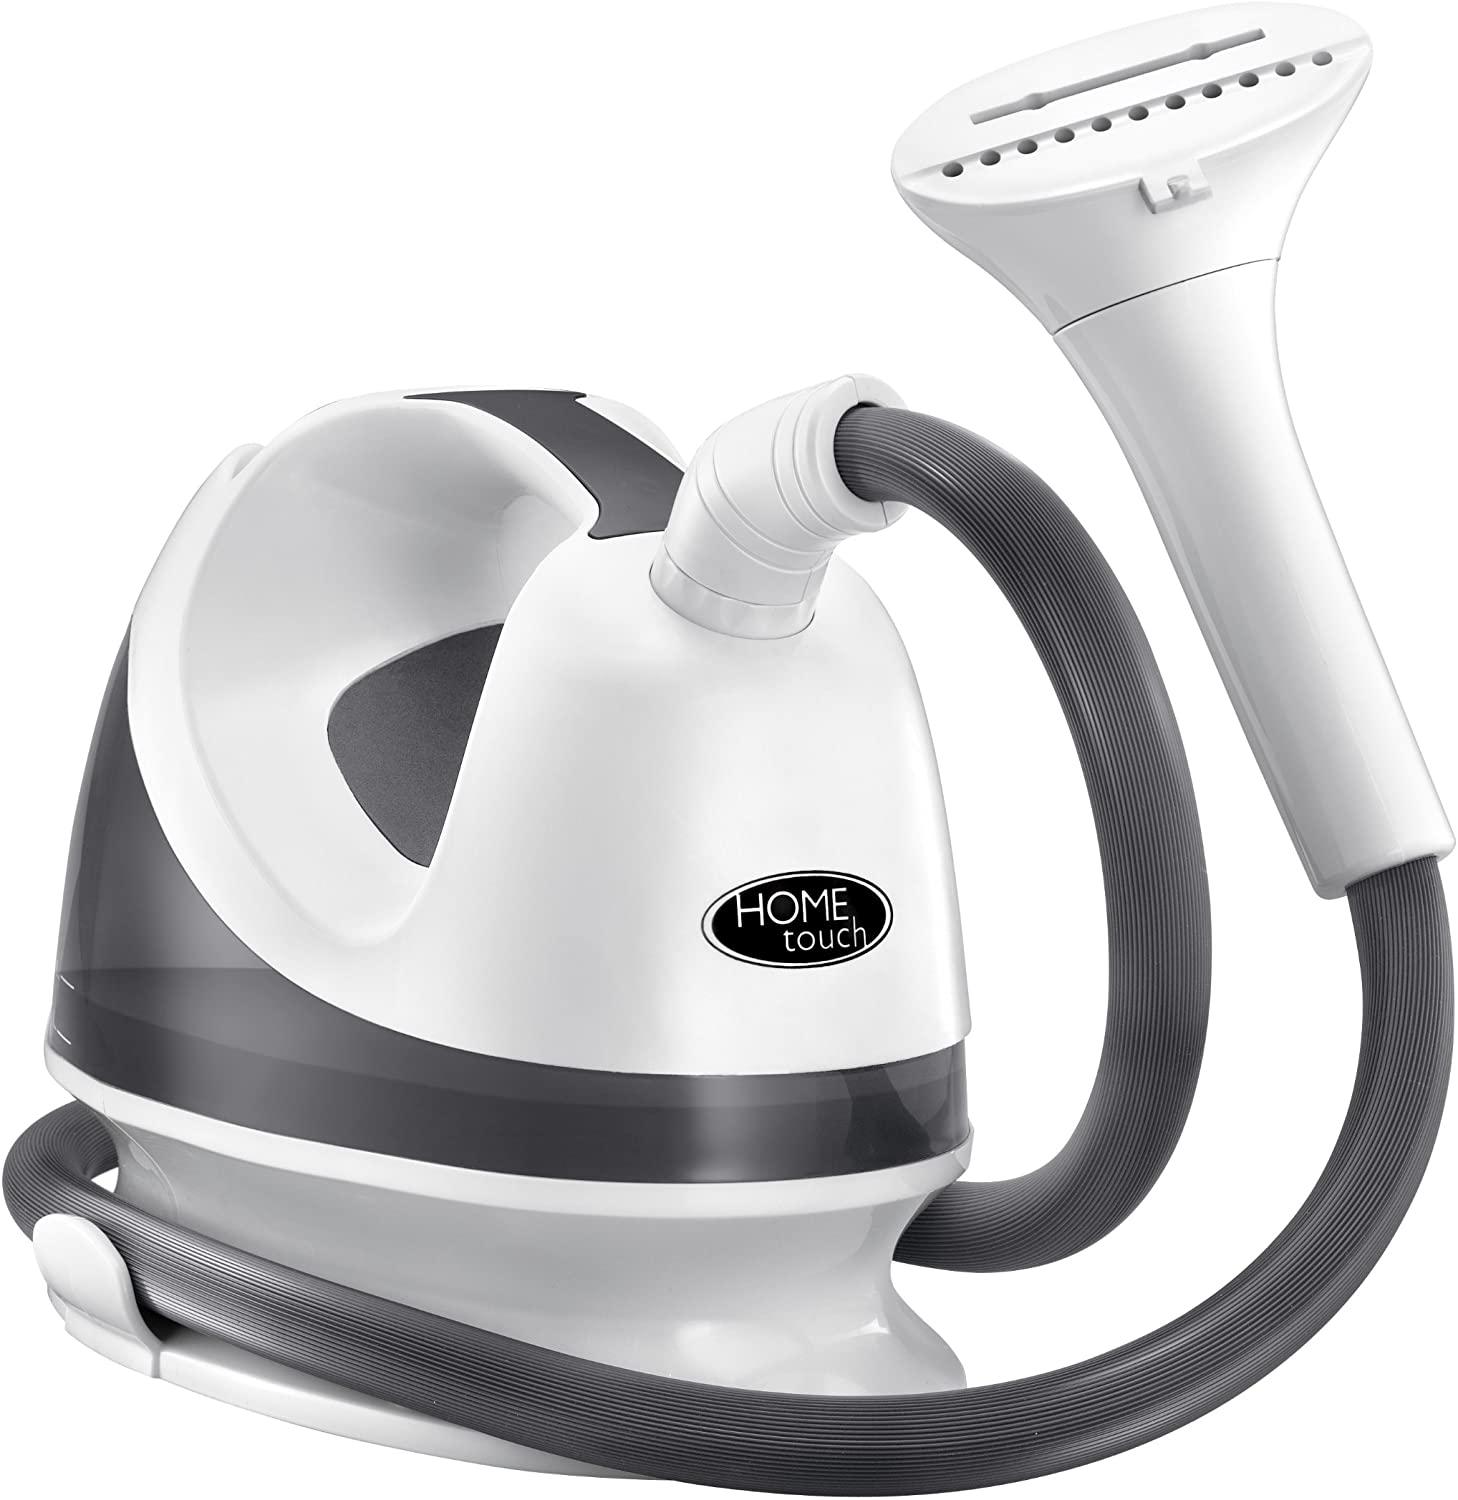 Homedics PS-150 Perfect Steam Portable Compact Garment Steamer Instruction Manual and Warranty Information